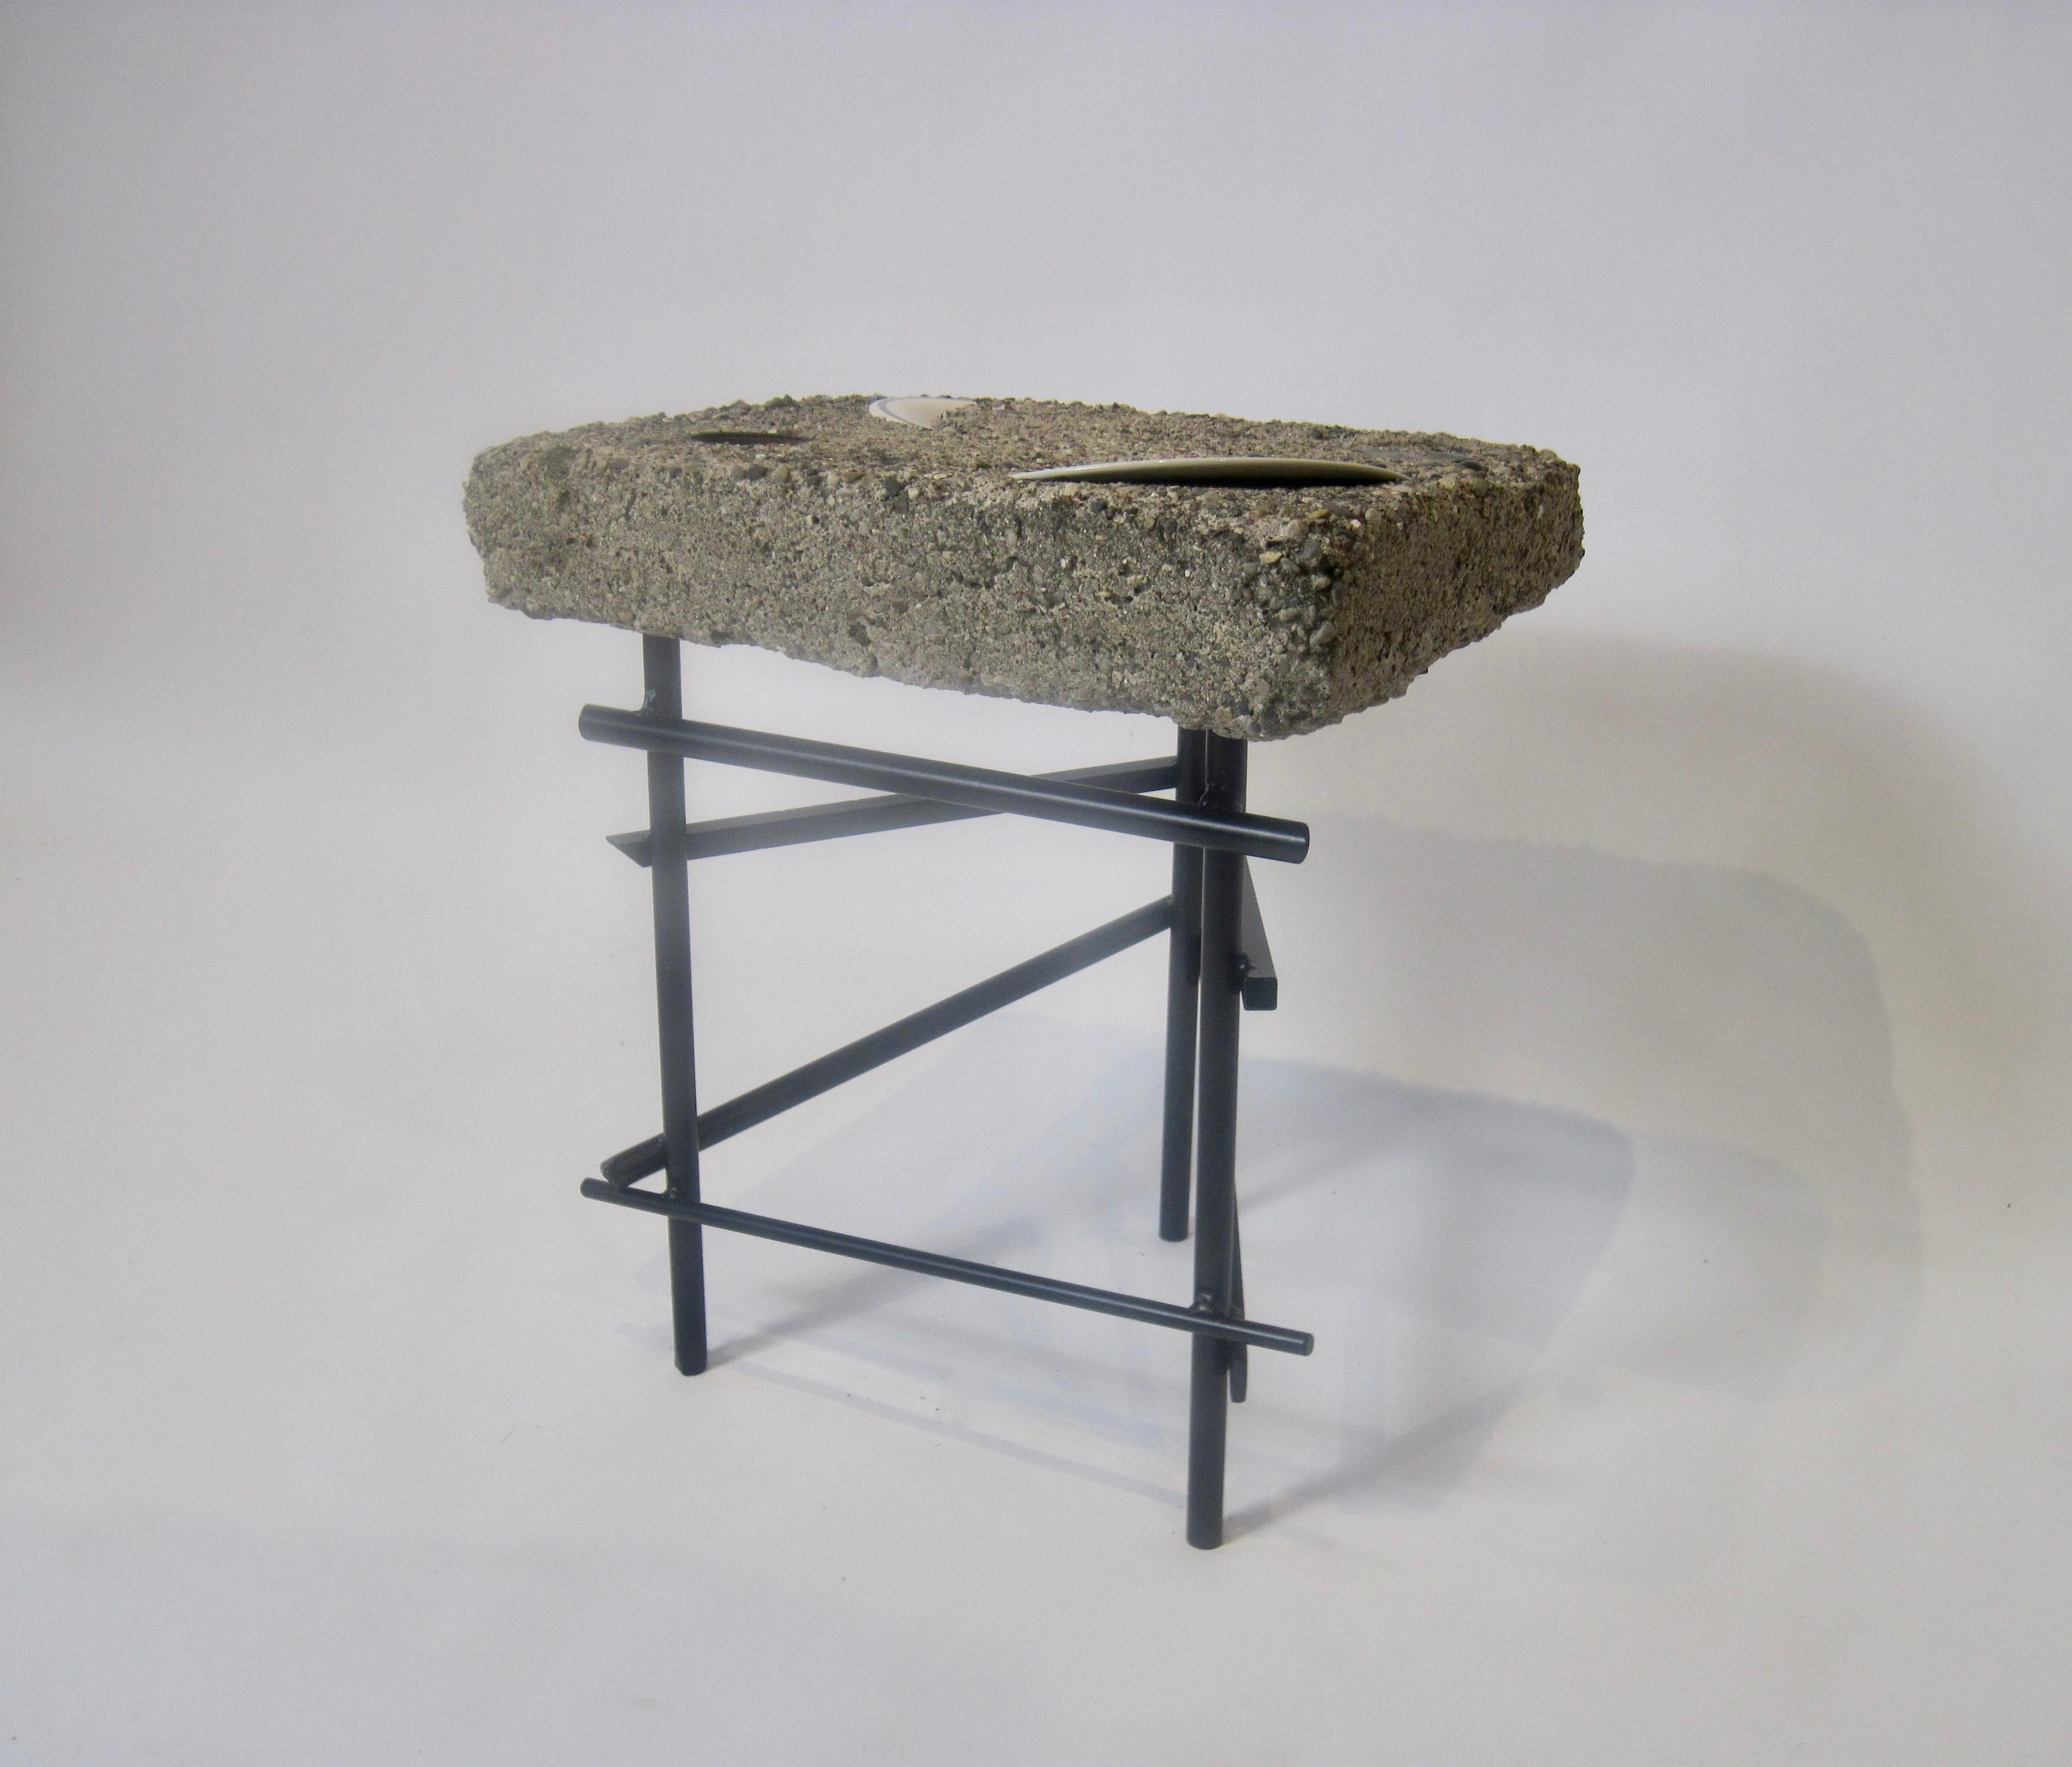 Studio Made Found Object Cement Table with Sculptural Steel Base  In Good Condition For Sale In Ferndale, MI